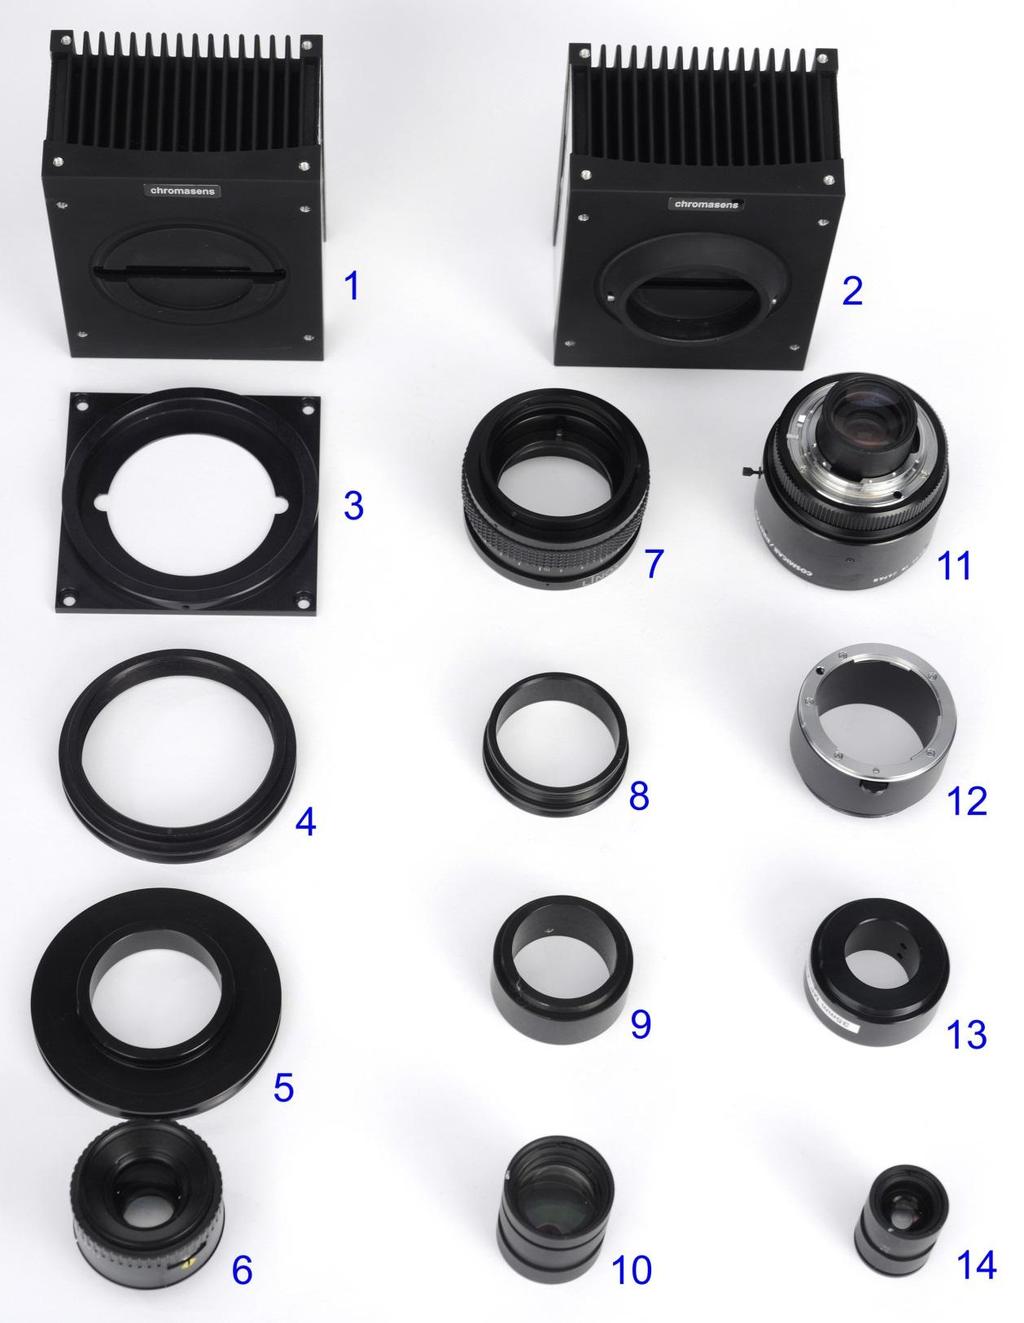 6.7 Optical accessories 6.7.1 Lenses and mounts Chromasens offers a large variety of accessories which are designed to provide maximum flexibility and get most out of the camera.